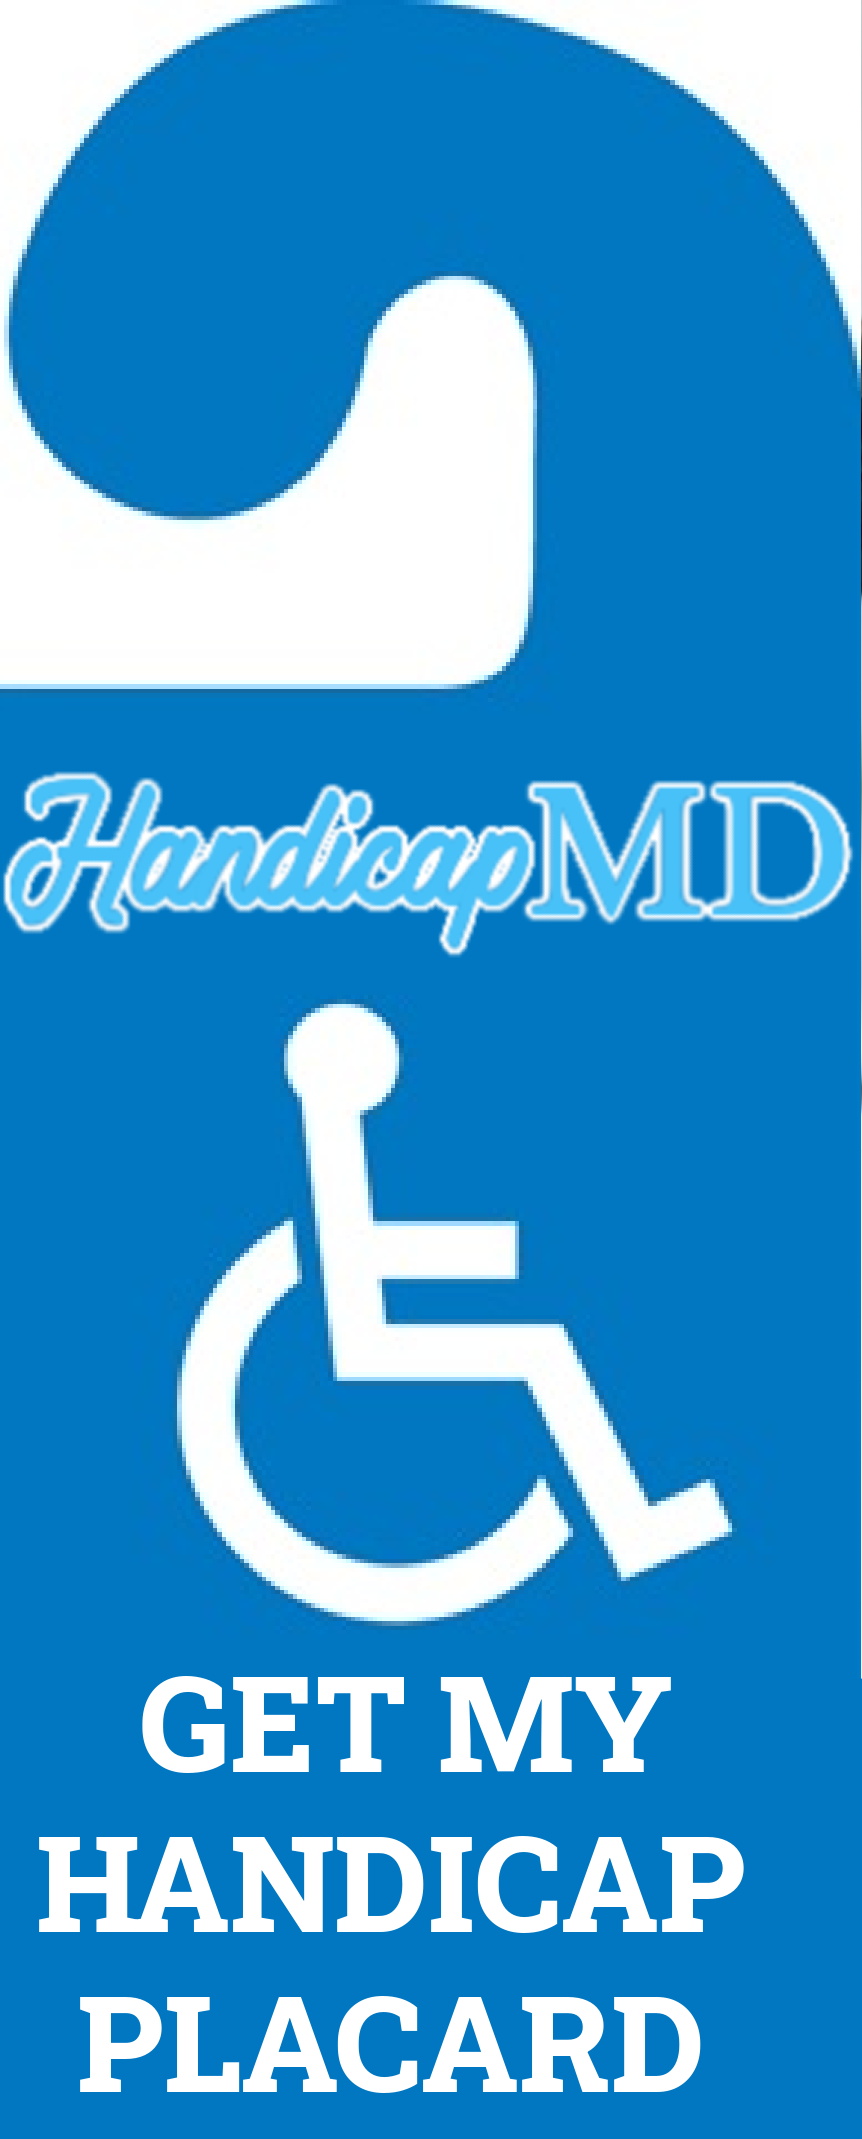 How To Get A Handicap Parking Placard Renewal in Iowa